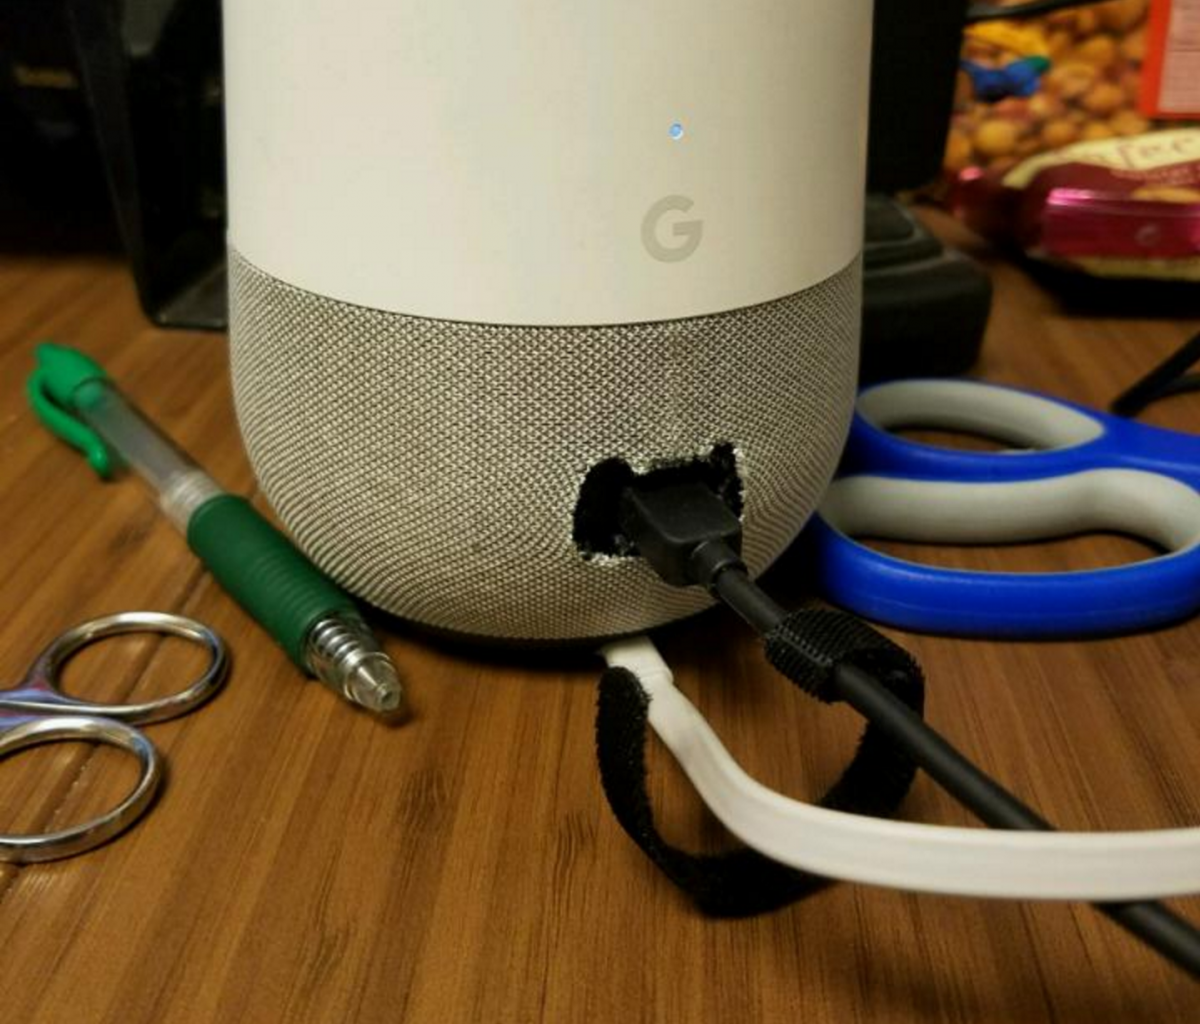 The Chromecast Ethernet Adapter Works with Google Home